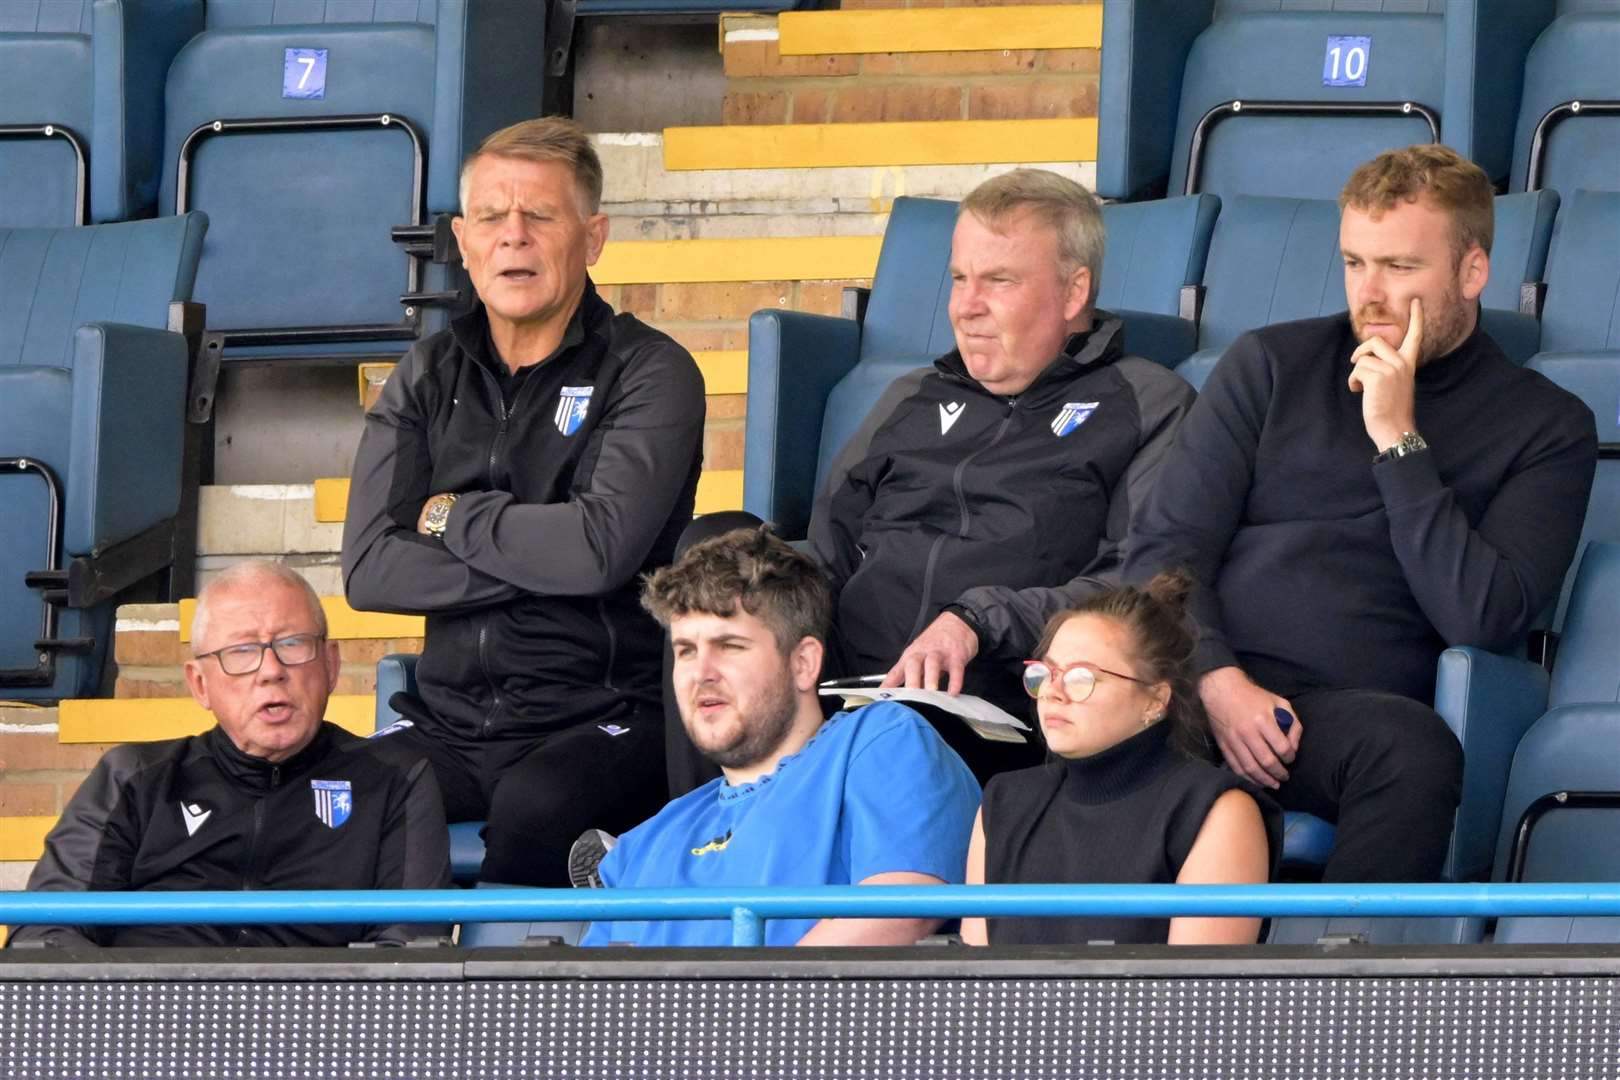 Gillingham’s recruitment department including Andy Hessenthaler and Kenny Jackett watch Saturday’s game Picture: Keith Gillard